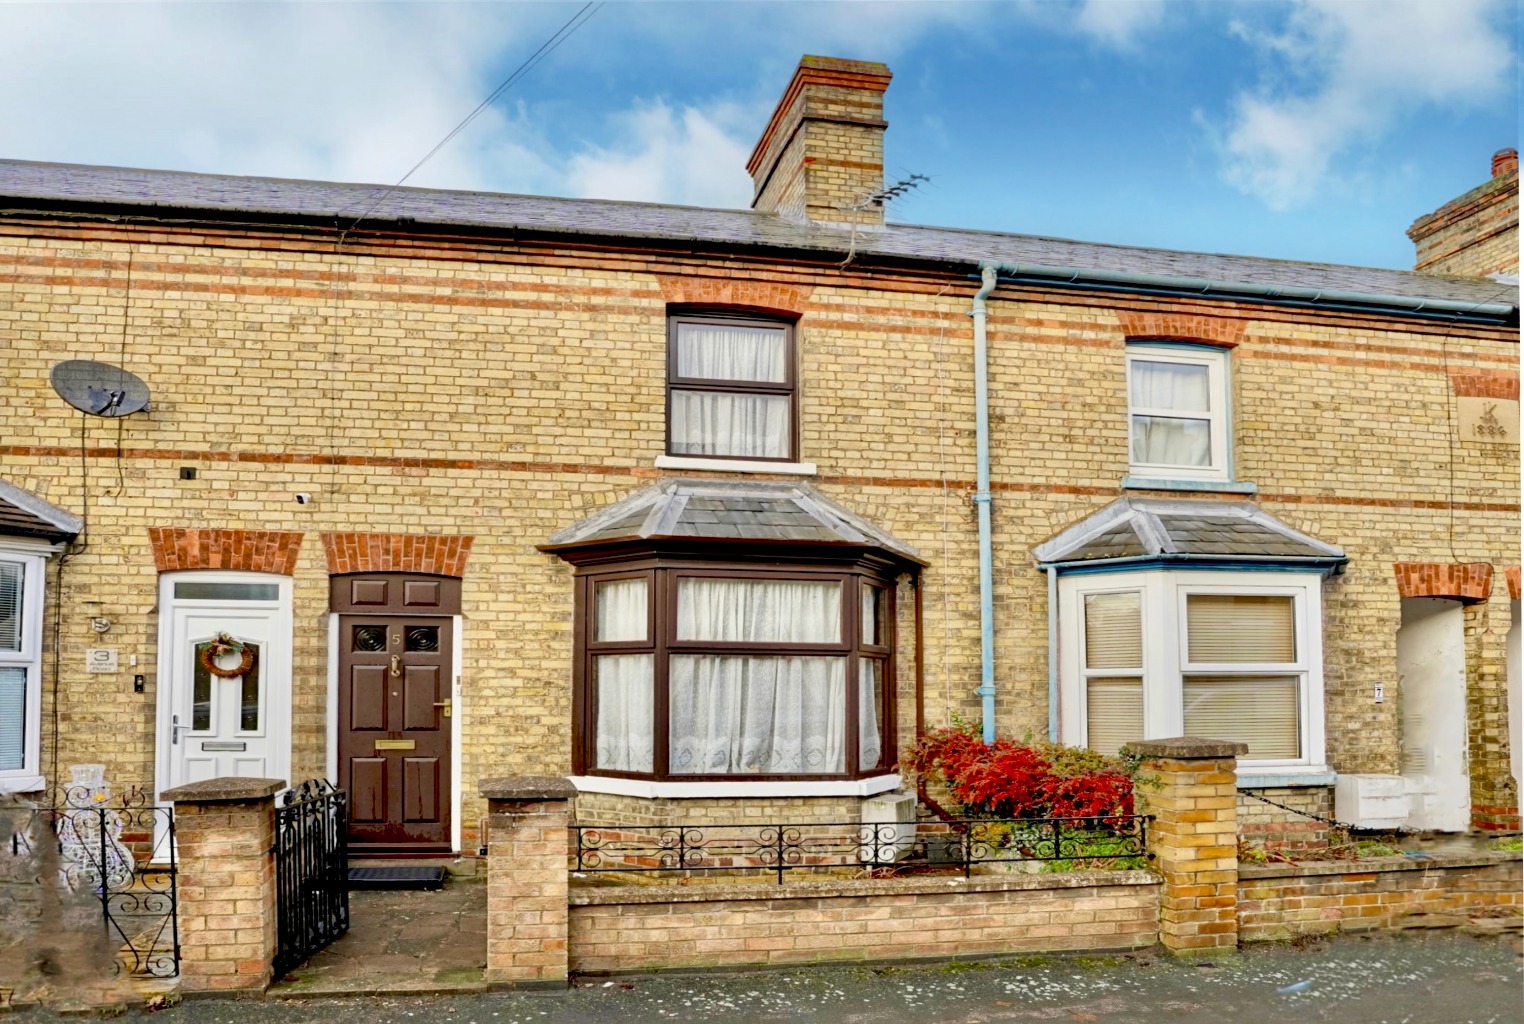 3 bed  for sale in Avenue Road, St. Neots, PE19